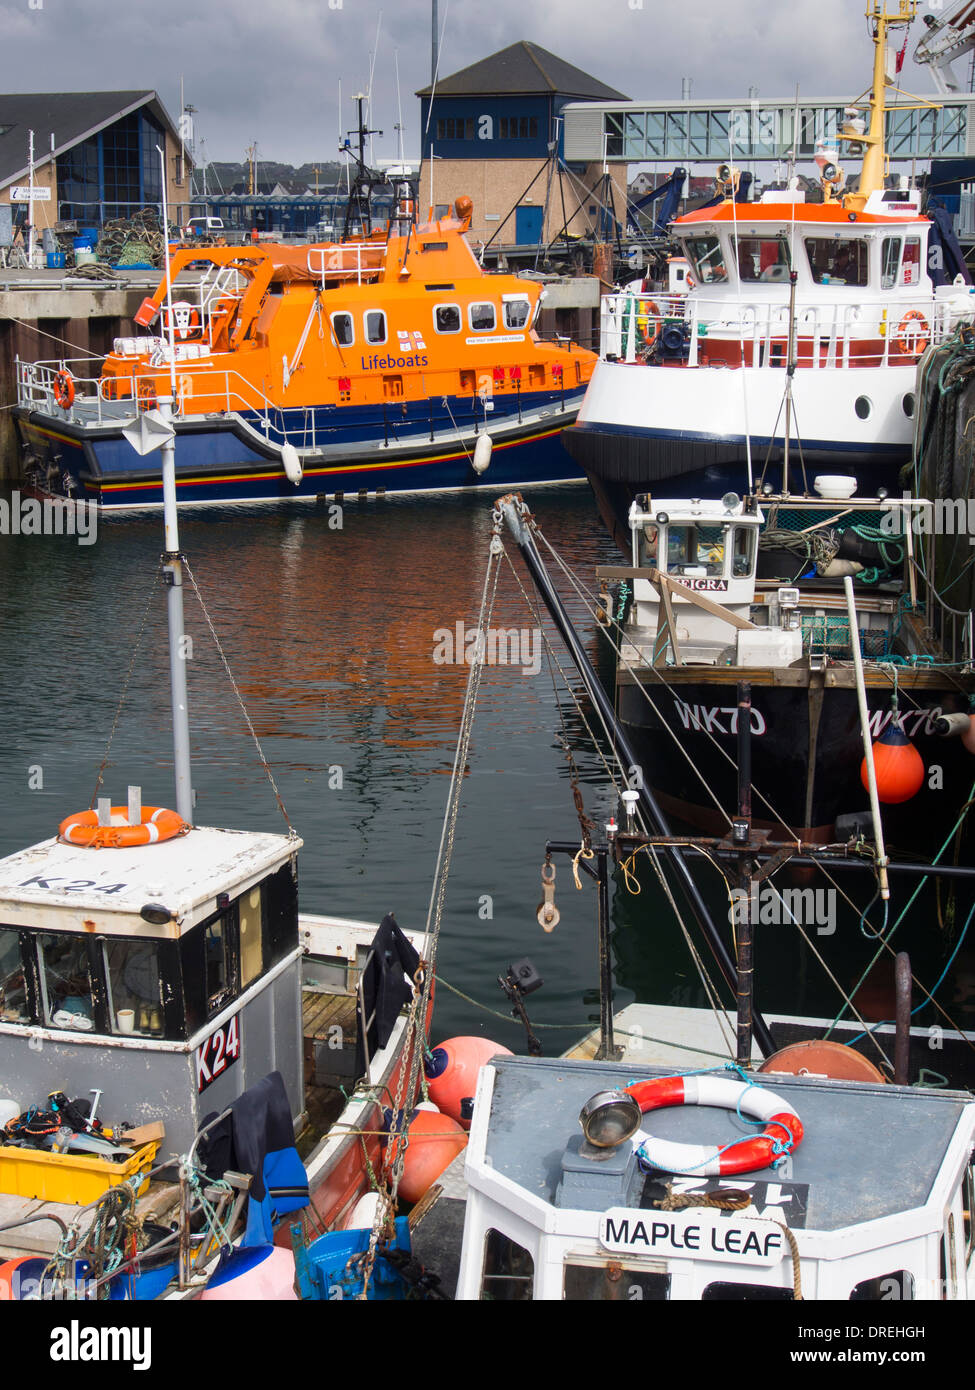 Scotland, Orkney Islands, Mainland Orkney. A variety of sea boats moored in Stromness Harbour on mainland Orkney. Stock Photo